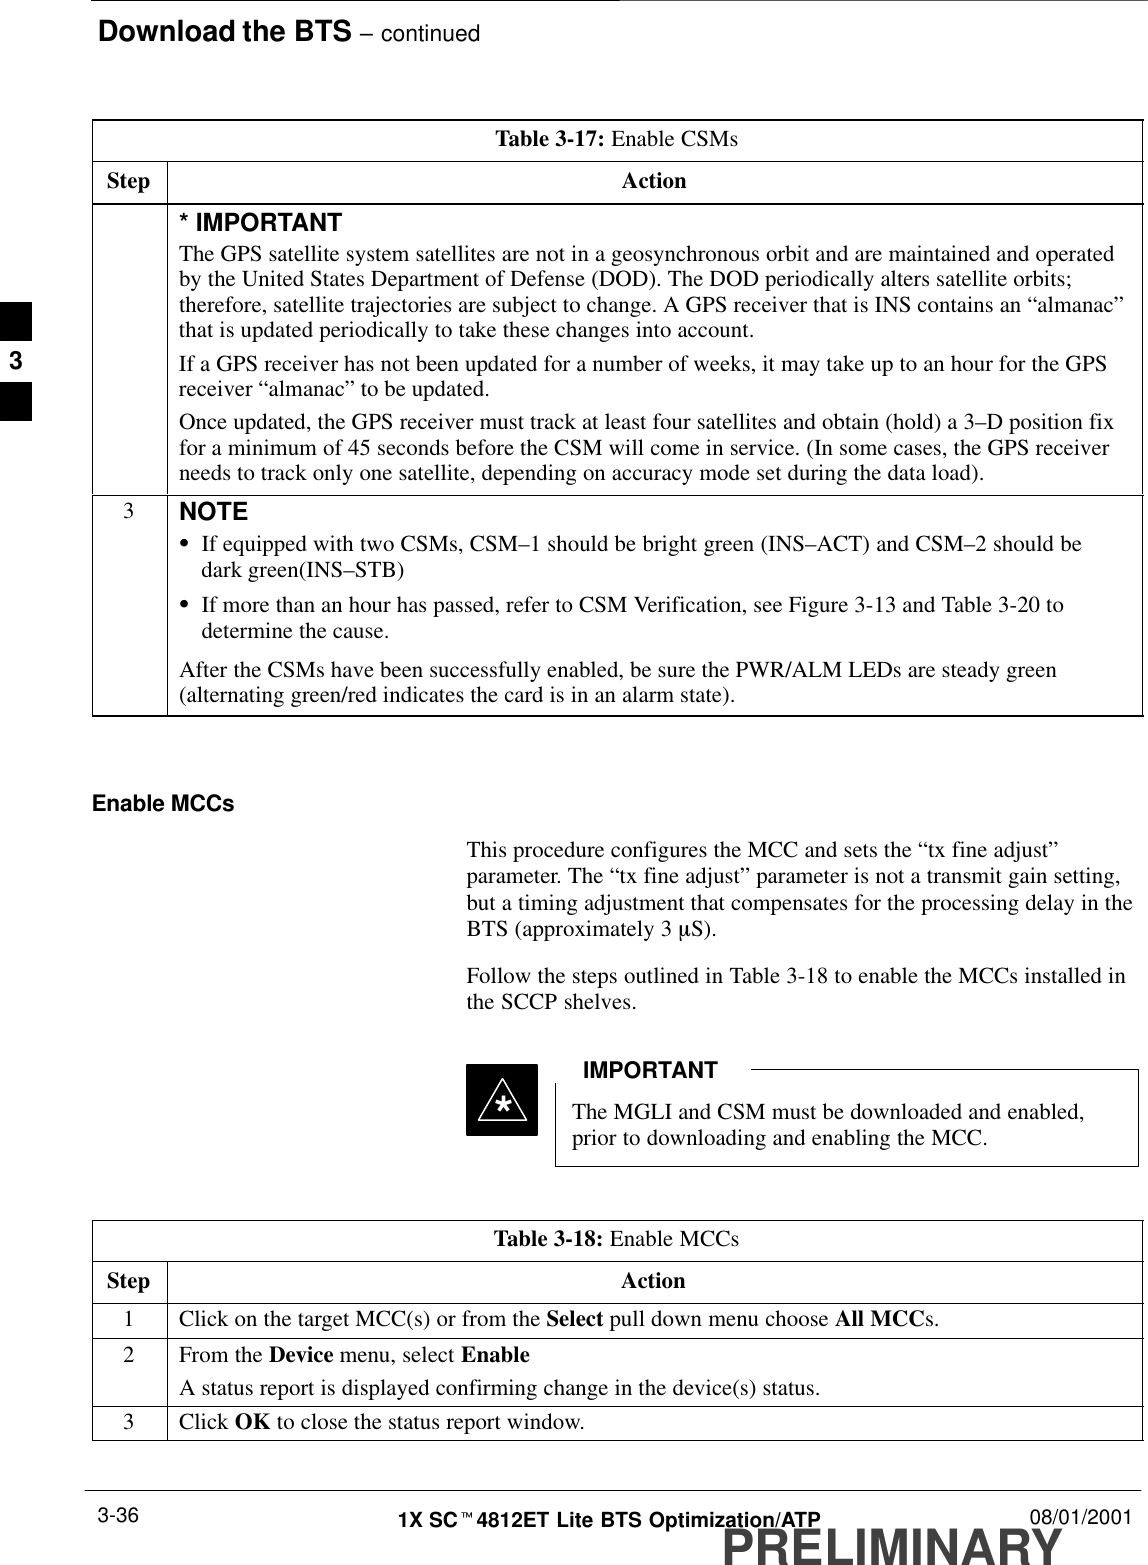 Download the BTS – continuedPRELIMINARY1X SCt4812ET Lite BTS Optimization/ATP 08/01/20013-36Table 3-17: Enable CSMsStep Action* IMPORTANTThe GPS satellite system satellites are not in a geosynchronous orbit and are maintained and operatedby the United States Department of Defense (DOD). The DOD periodically alters satellite orbits;therefore, satellite trajectories are subject to change. A GPS receiver that is INS contains an “almanac”that is updated periodically to take these changes into account.If a GPS receiver has not been updated for a number of weeks, it may take up to an hour for the GPSreceiver “almanac” to be updated.Once updated, the GPS receiver must track at least four satellites and obtain (hold) a 3–D position fixfor a minimum of 45 seconds before the CSM will come in service. (In some cases, the GPS receiverneeds to track only one satellite, depending on accuracy mode set during the data load).3NOTESIf equipped with two CSMs, CSM–1 should be bright green (INS–ACT) and CSM–2 should bedark green(INS–STB)SIf more than an hour has passed, refer to CSM Verification, see Figure 3-13 and Table 3-20 todetermine the cause.After the CSMs have been successfully enabled, be sure the PWR/ALM LEDs are steady green(alternating green/red indicates the card is in an alarm state). Enable MCCsThis procedure configures the MCC and sets the “tx fine adjust”parameter. The “tx fine adjust” parameter is not a transmit gain setting,but a timing adjustment that compensates for the processing delay in theBTS (approximately 3 mS).Follow the steps outlined in Table 3-18 to enable the MCCs installed inthe SCCP shelves.The MGLI and CSM must be downloaded and enabled,prior to downloading and enabling the MCC.IMPORTANT*Table 3-18: Enable MCCsStep Action1Click on the target MCC(s) or from the Select pull down menu choose All MCCs.2From the Device menu, select EnableA status report is displayed confirming change in the device(s) status.3 Click OK to close the status report window. 3